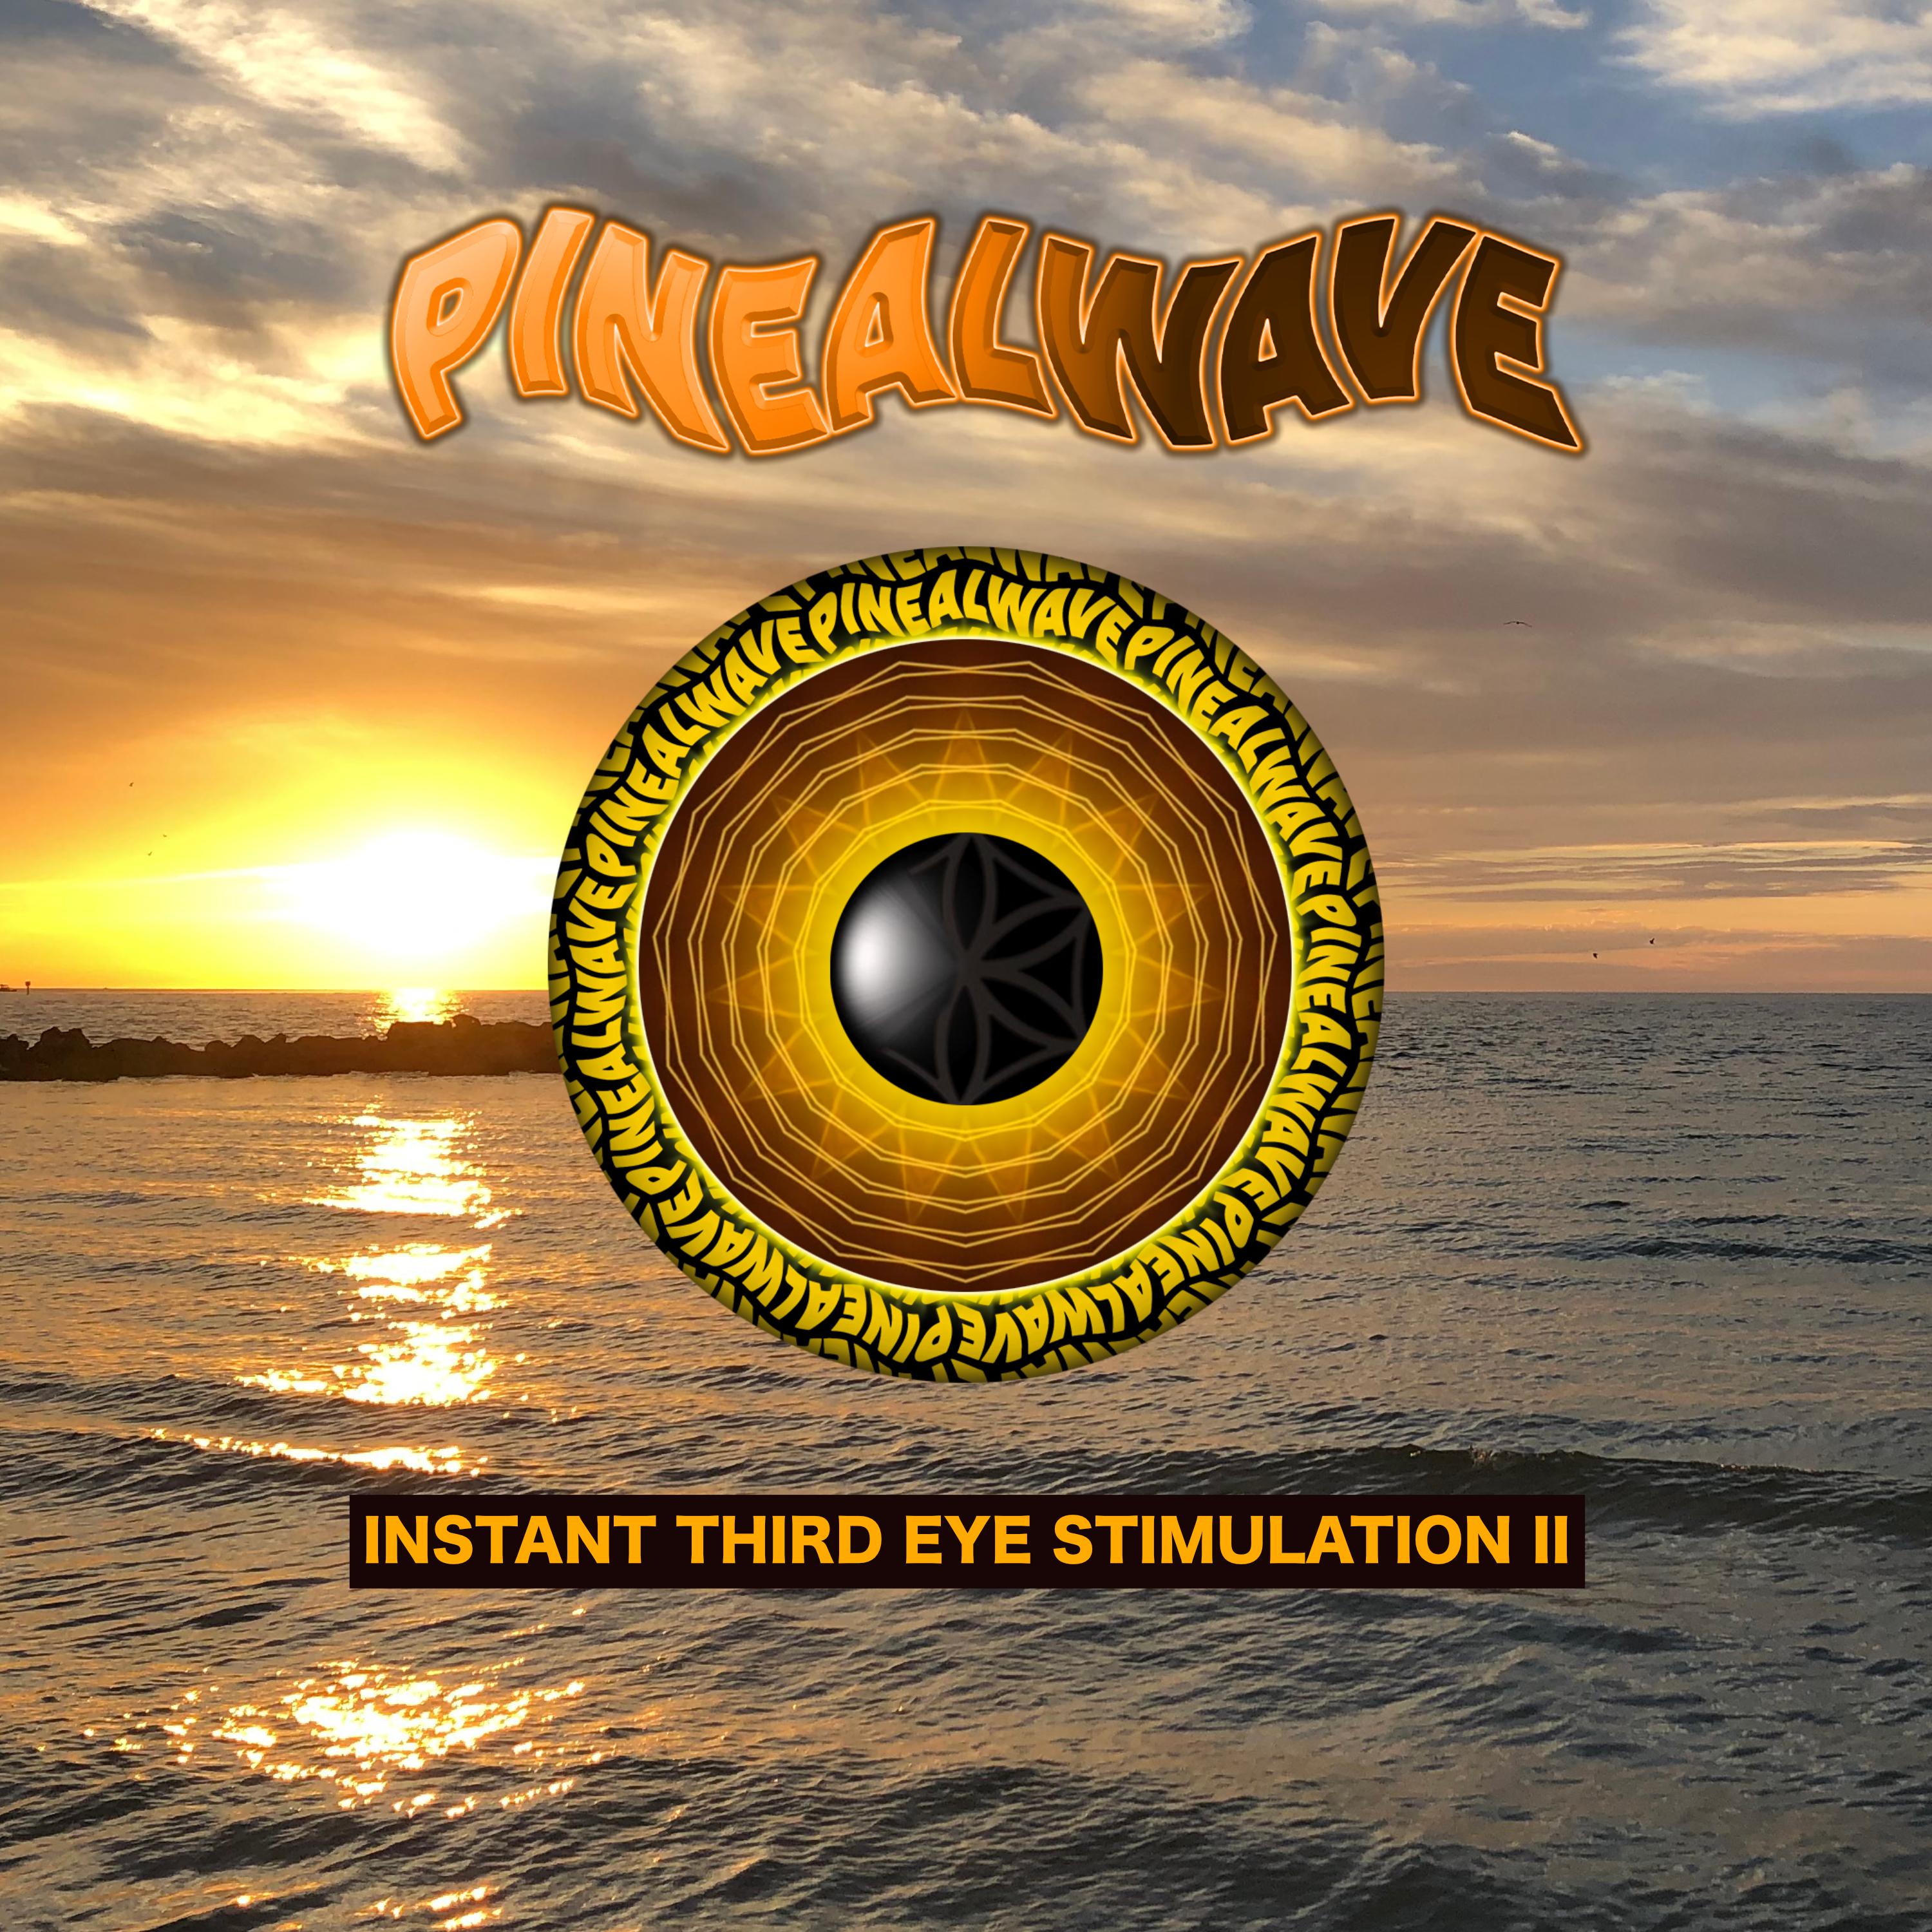 Pinealwave - Source Connection